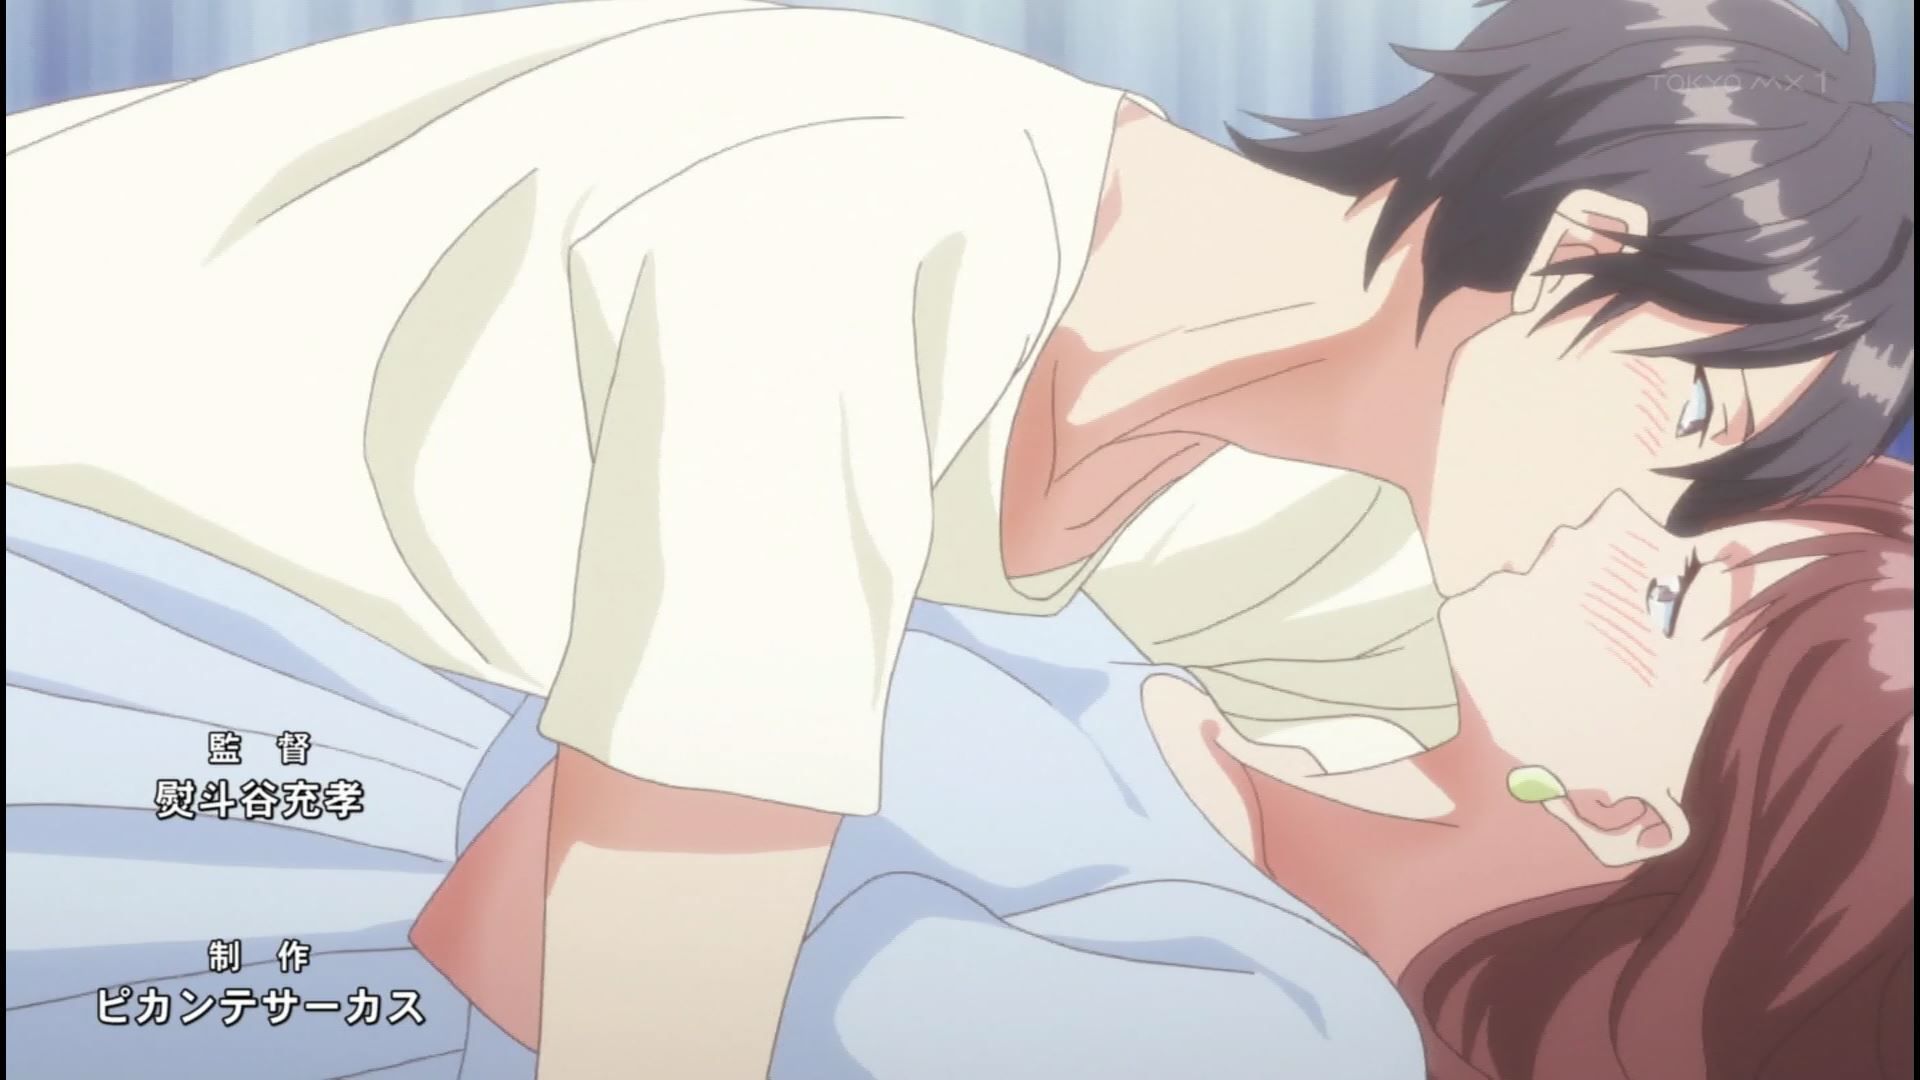 Anime "Get disturbed with my fingers. In the 8 episodes, two people have sex happily normally and the last episode 7